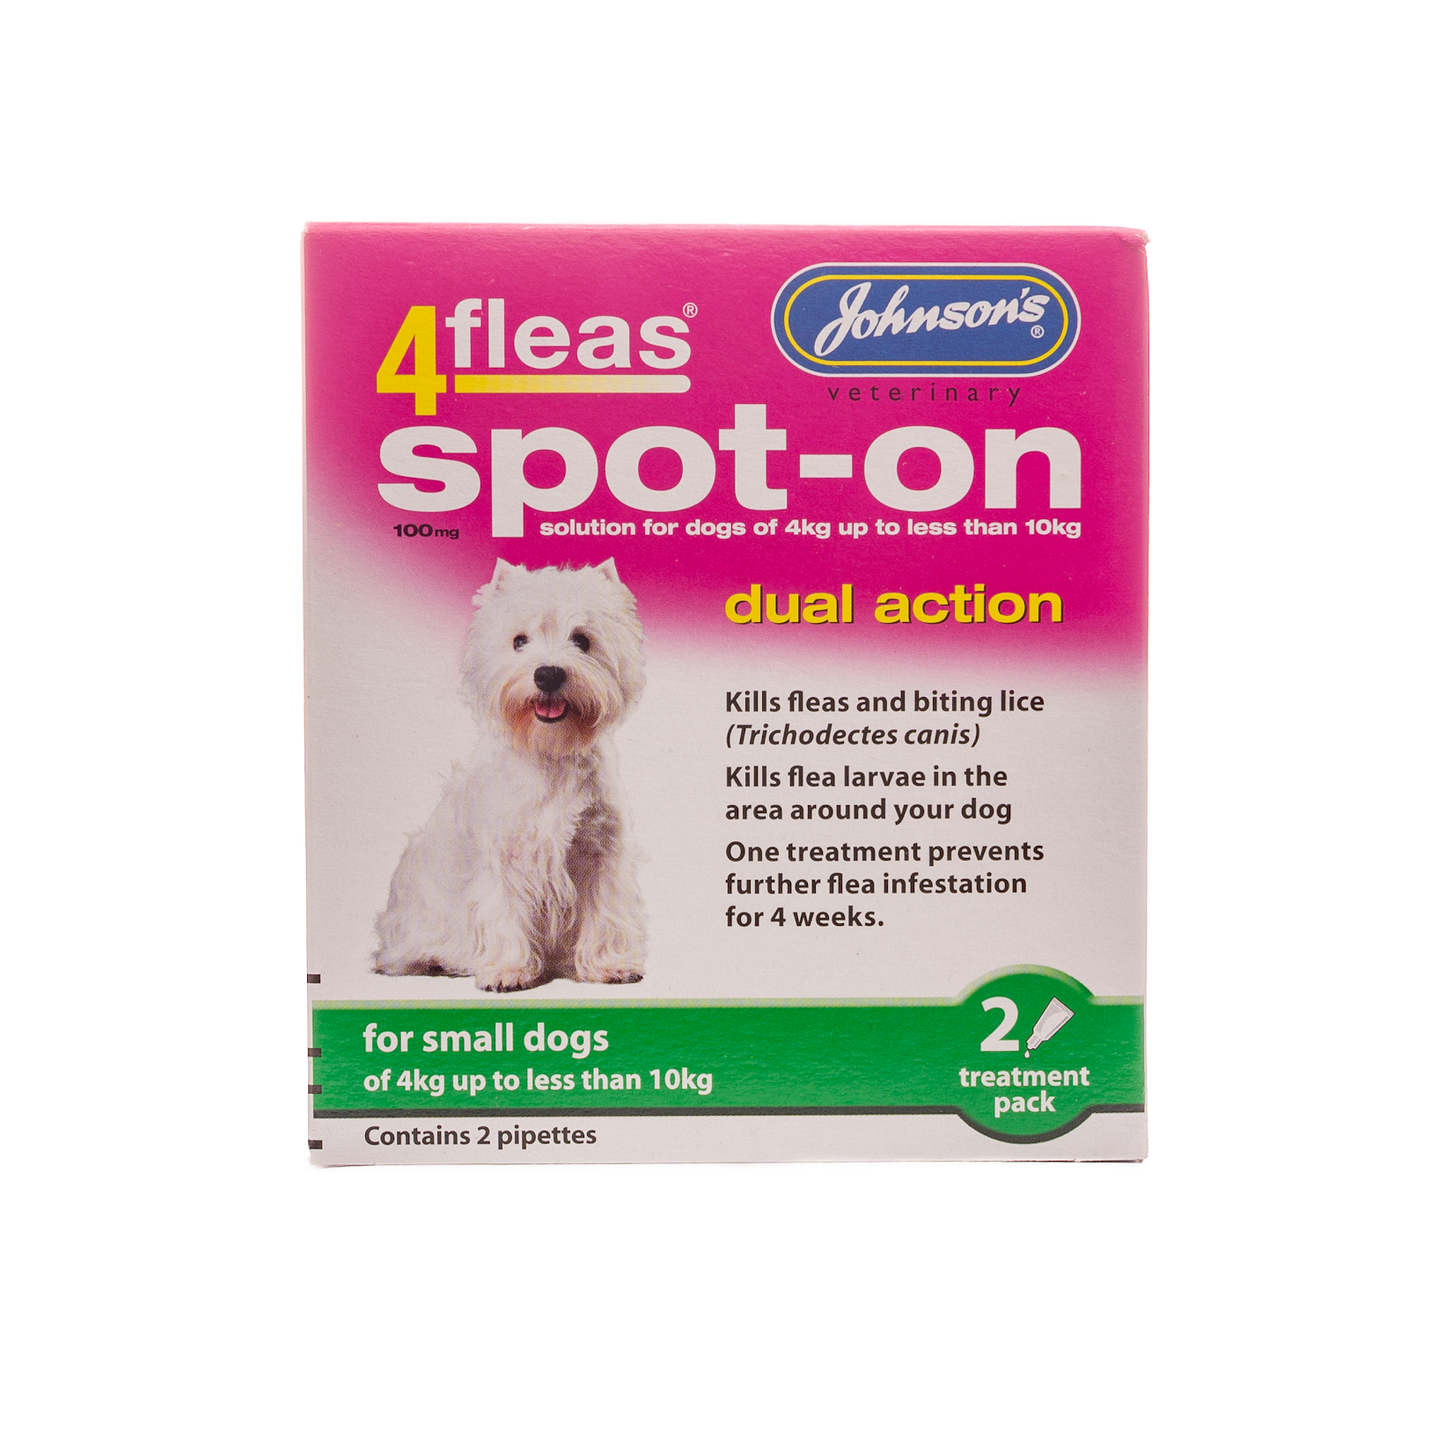 4fleas Spot-on Small Dog 2 Vial Pack